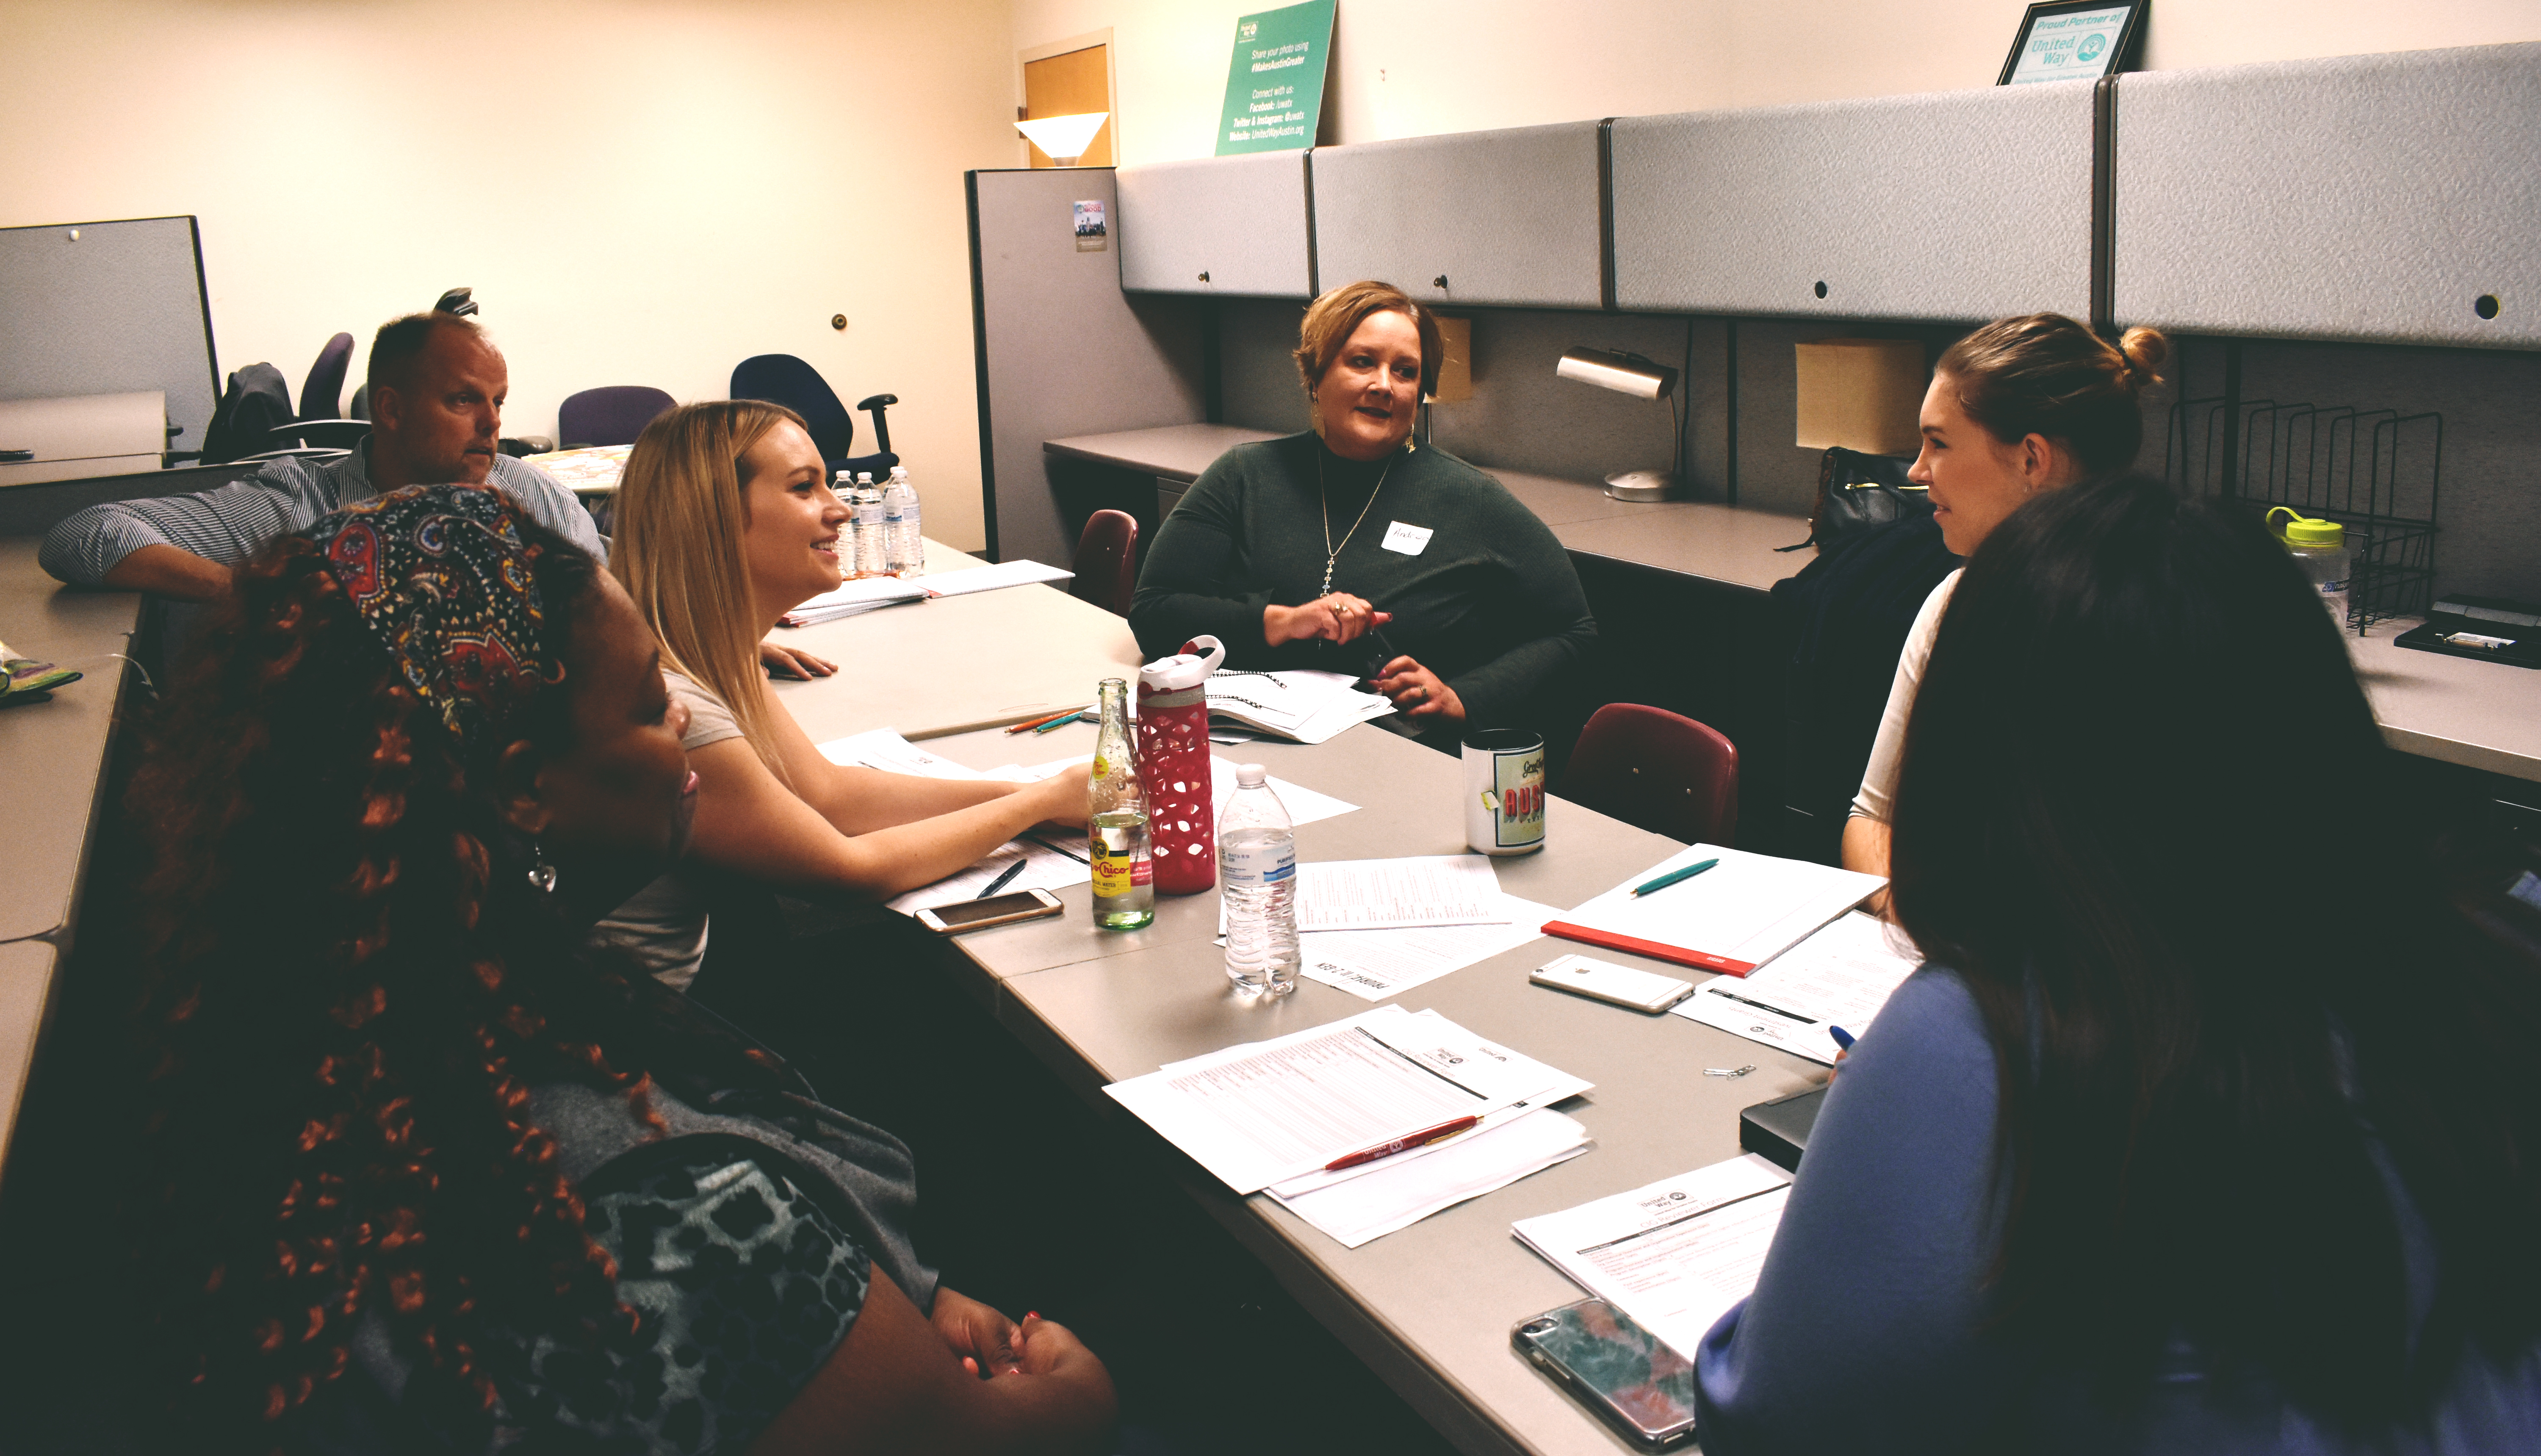 Forty volunteer reviewers evaluated agency proposals for alignment with UWATX strategic priorities for community impact and organizational capacity.